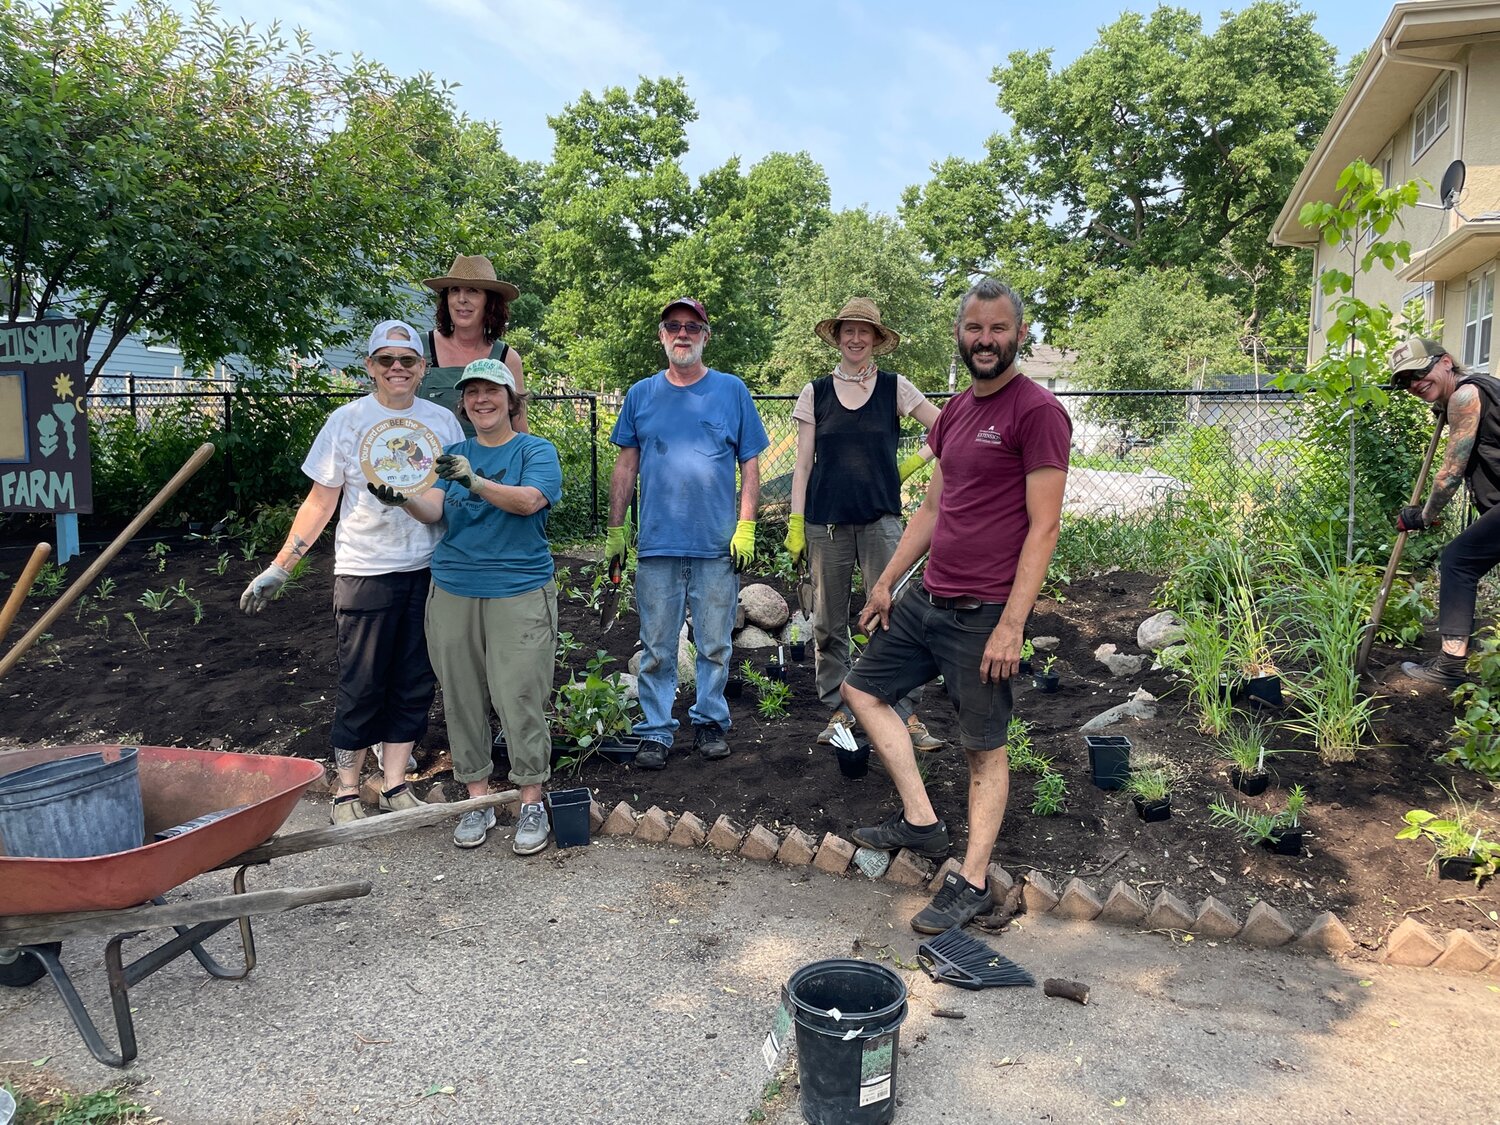 Volunteers plant wild geranium, purple prairie clover, wild bergamot, giant hyssop and culver’s root in gardens down the pollinator pathway so that the rusty patched bumblebees can find the same foods to eat at each location.